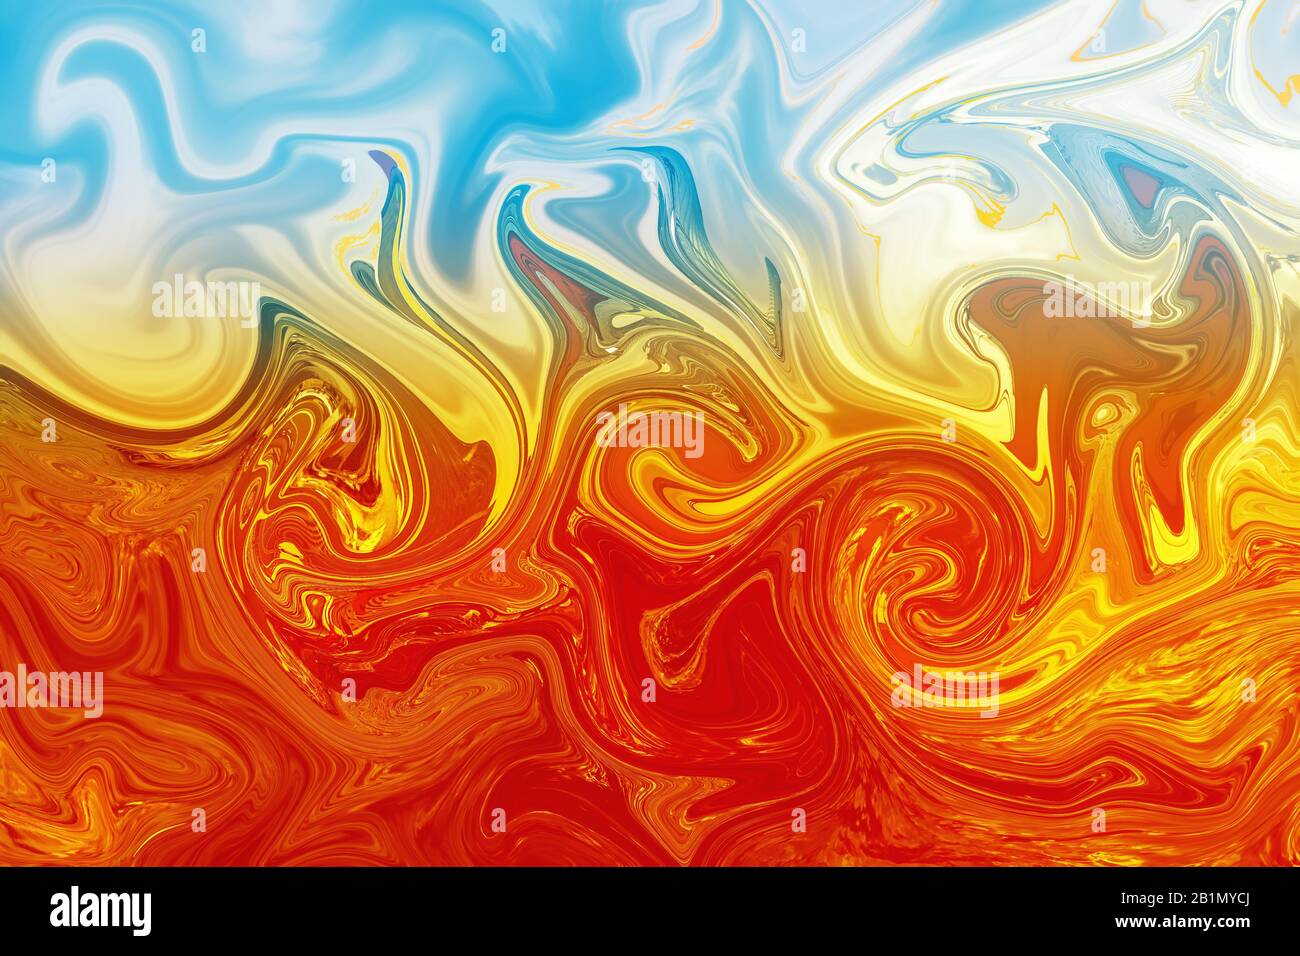 fire and ice fluid abstract background. Concept of heaven and hell, good and bad, hot and cold, yin and yang. Stock Photo